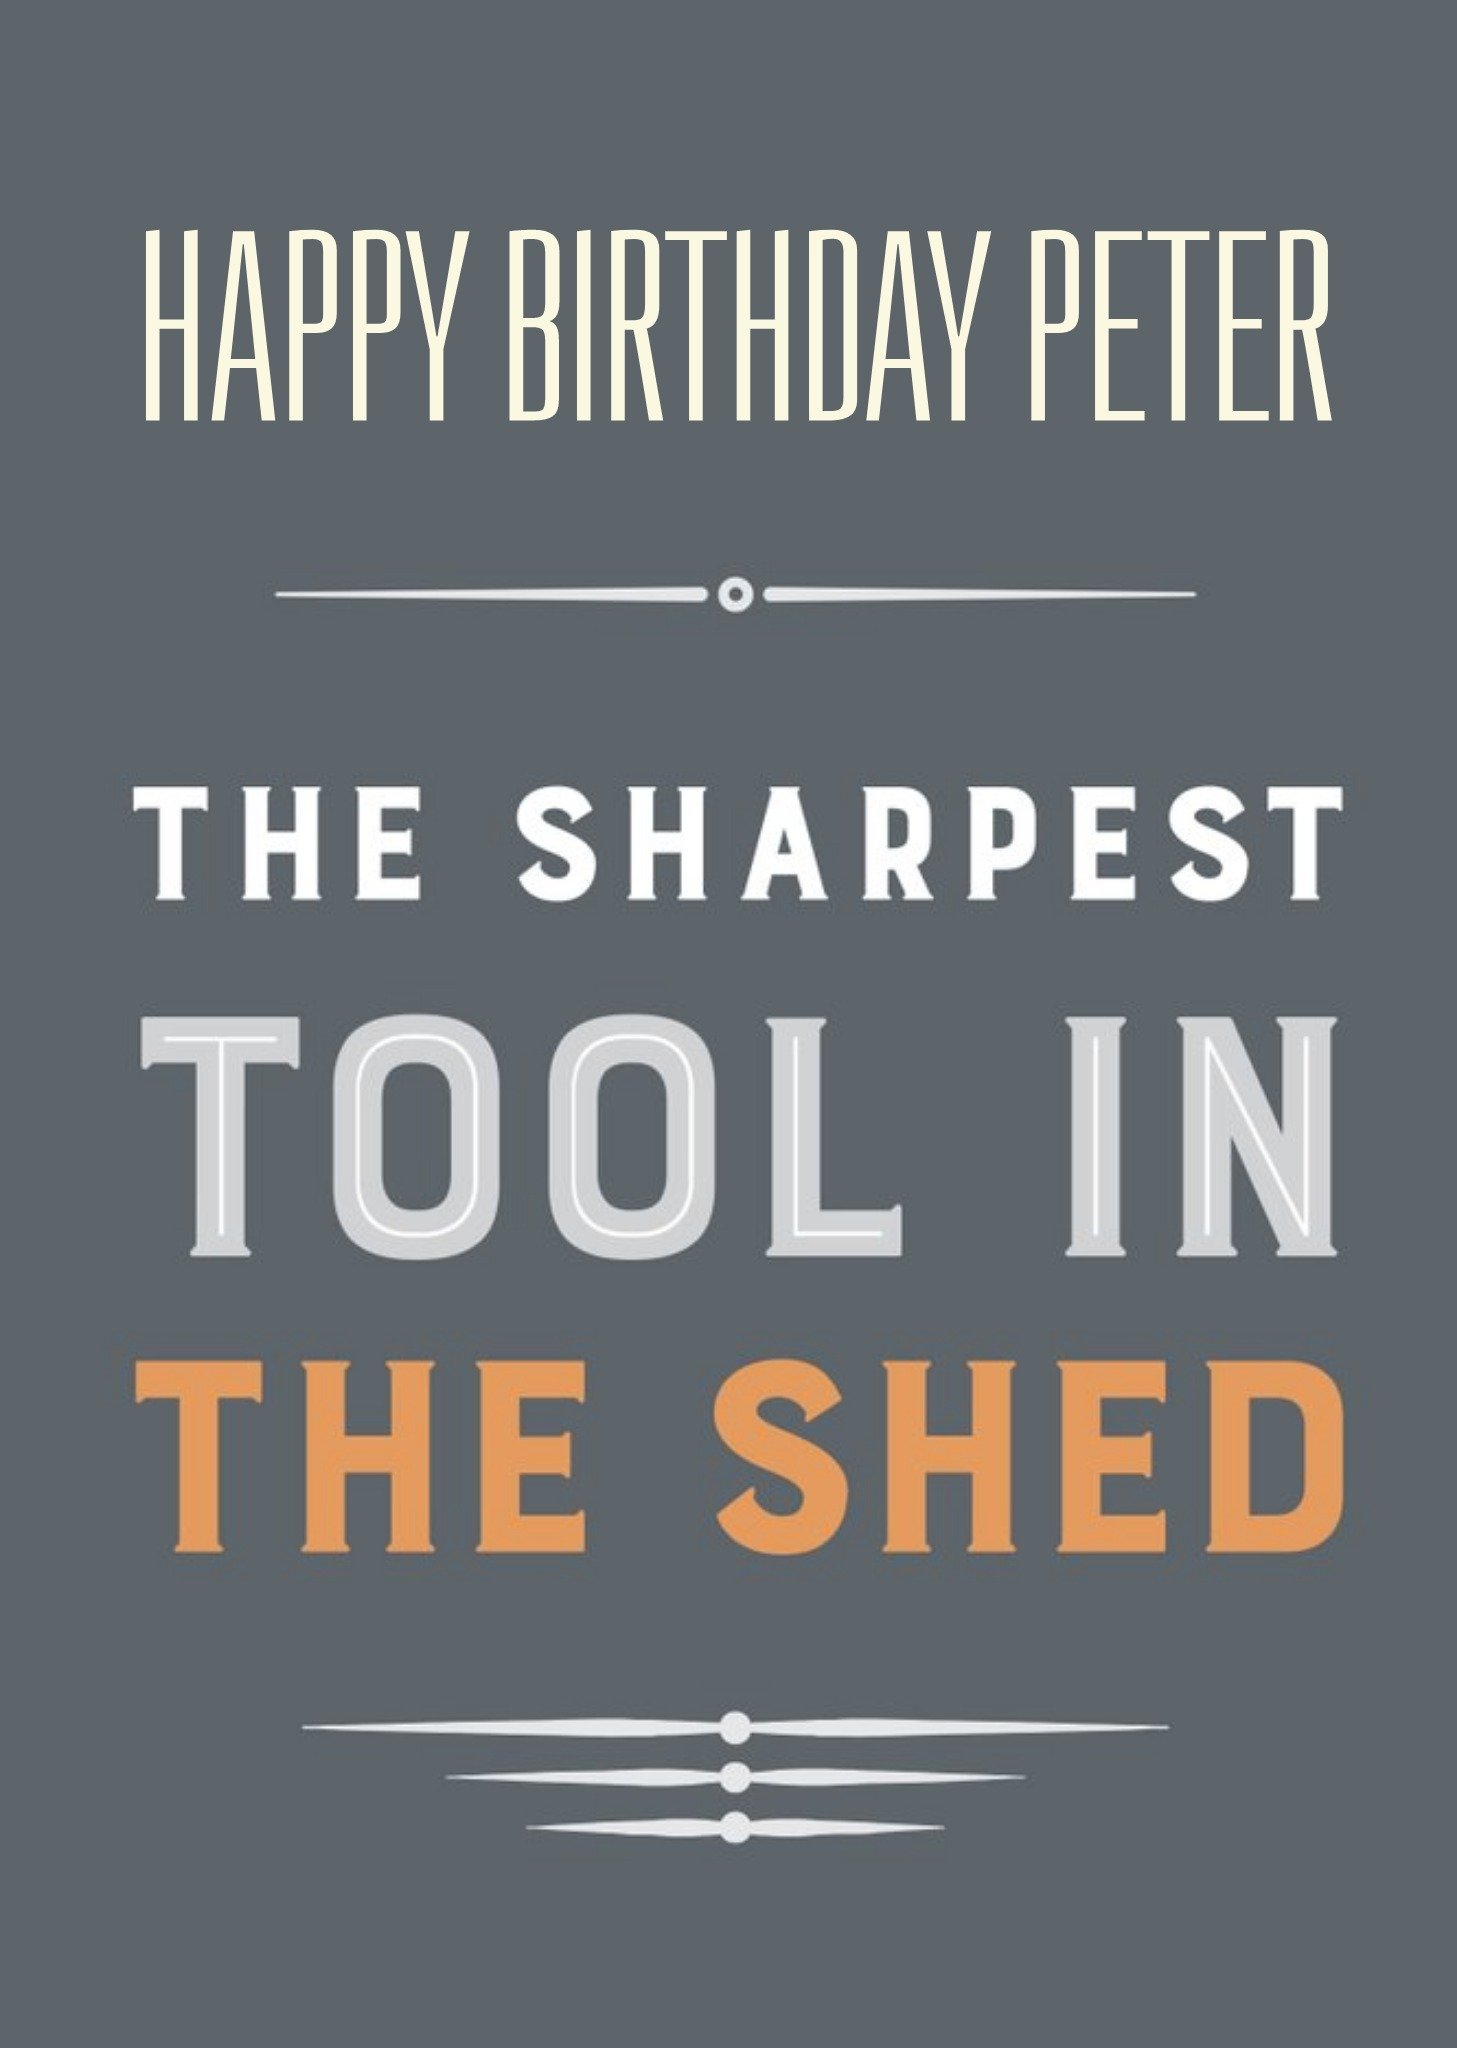 Moonpig The Sharpest Tool In The Shed Personalised Happy Birthday Card, Large